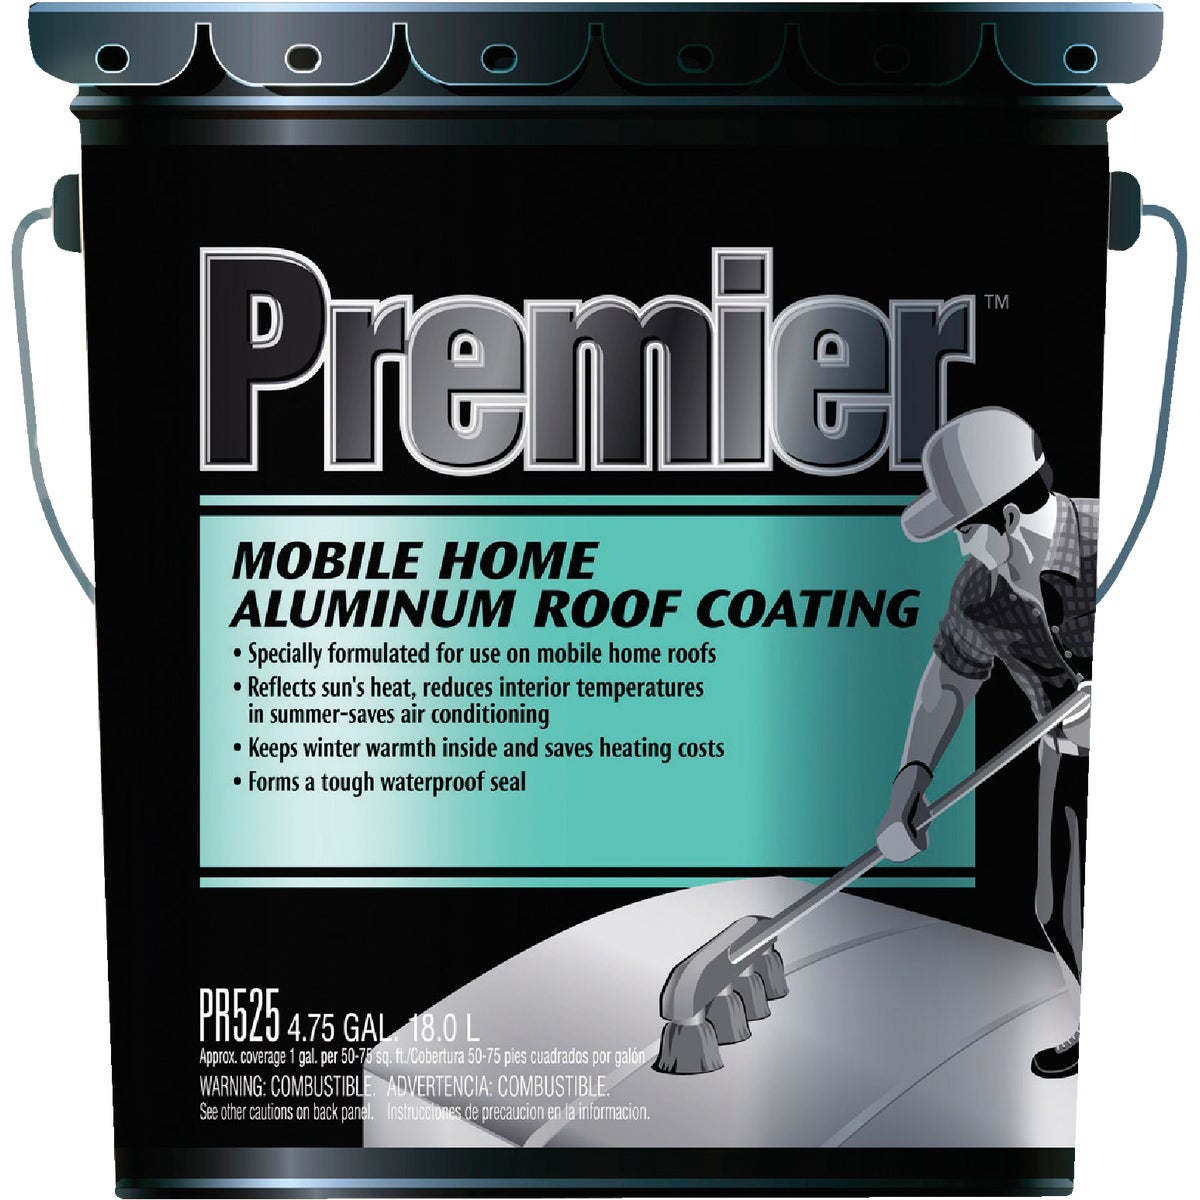 Item 100633, Specially formulated for use on mobile home roofs.